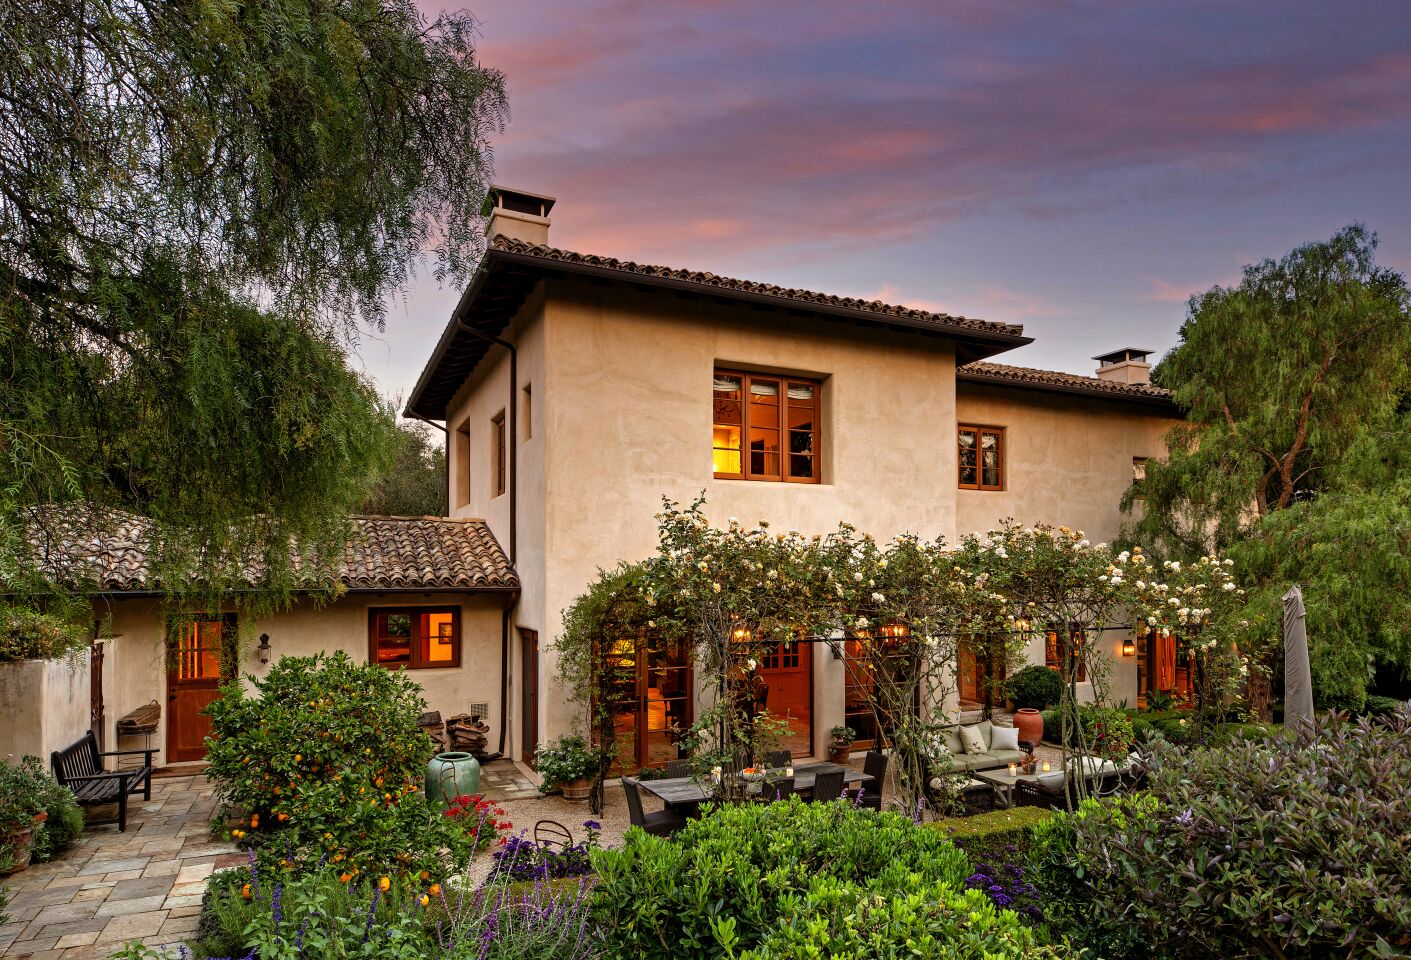 The exterior of the Montecito home with a patio area